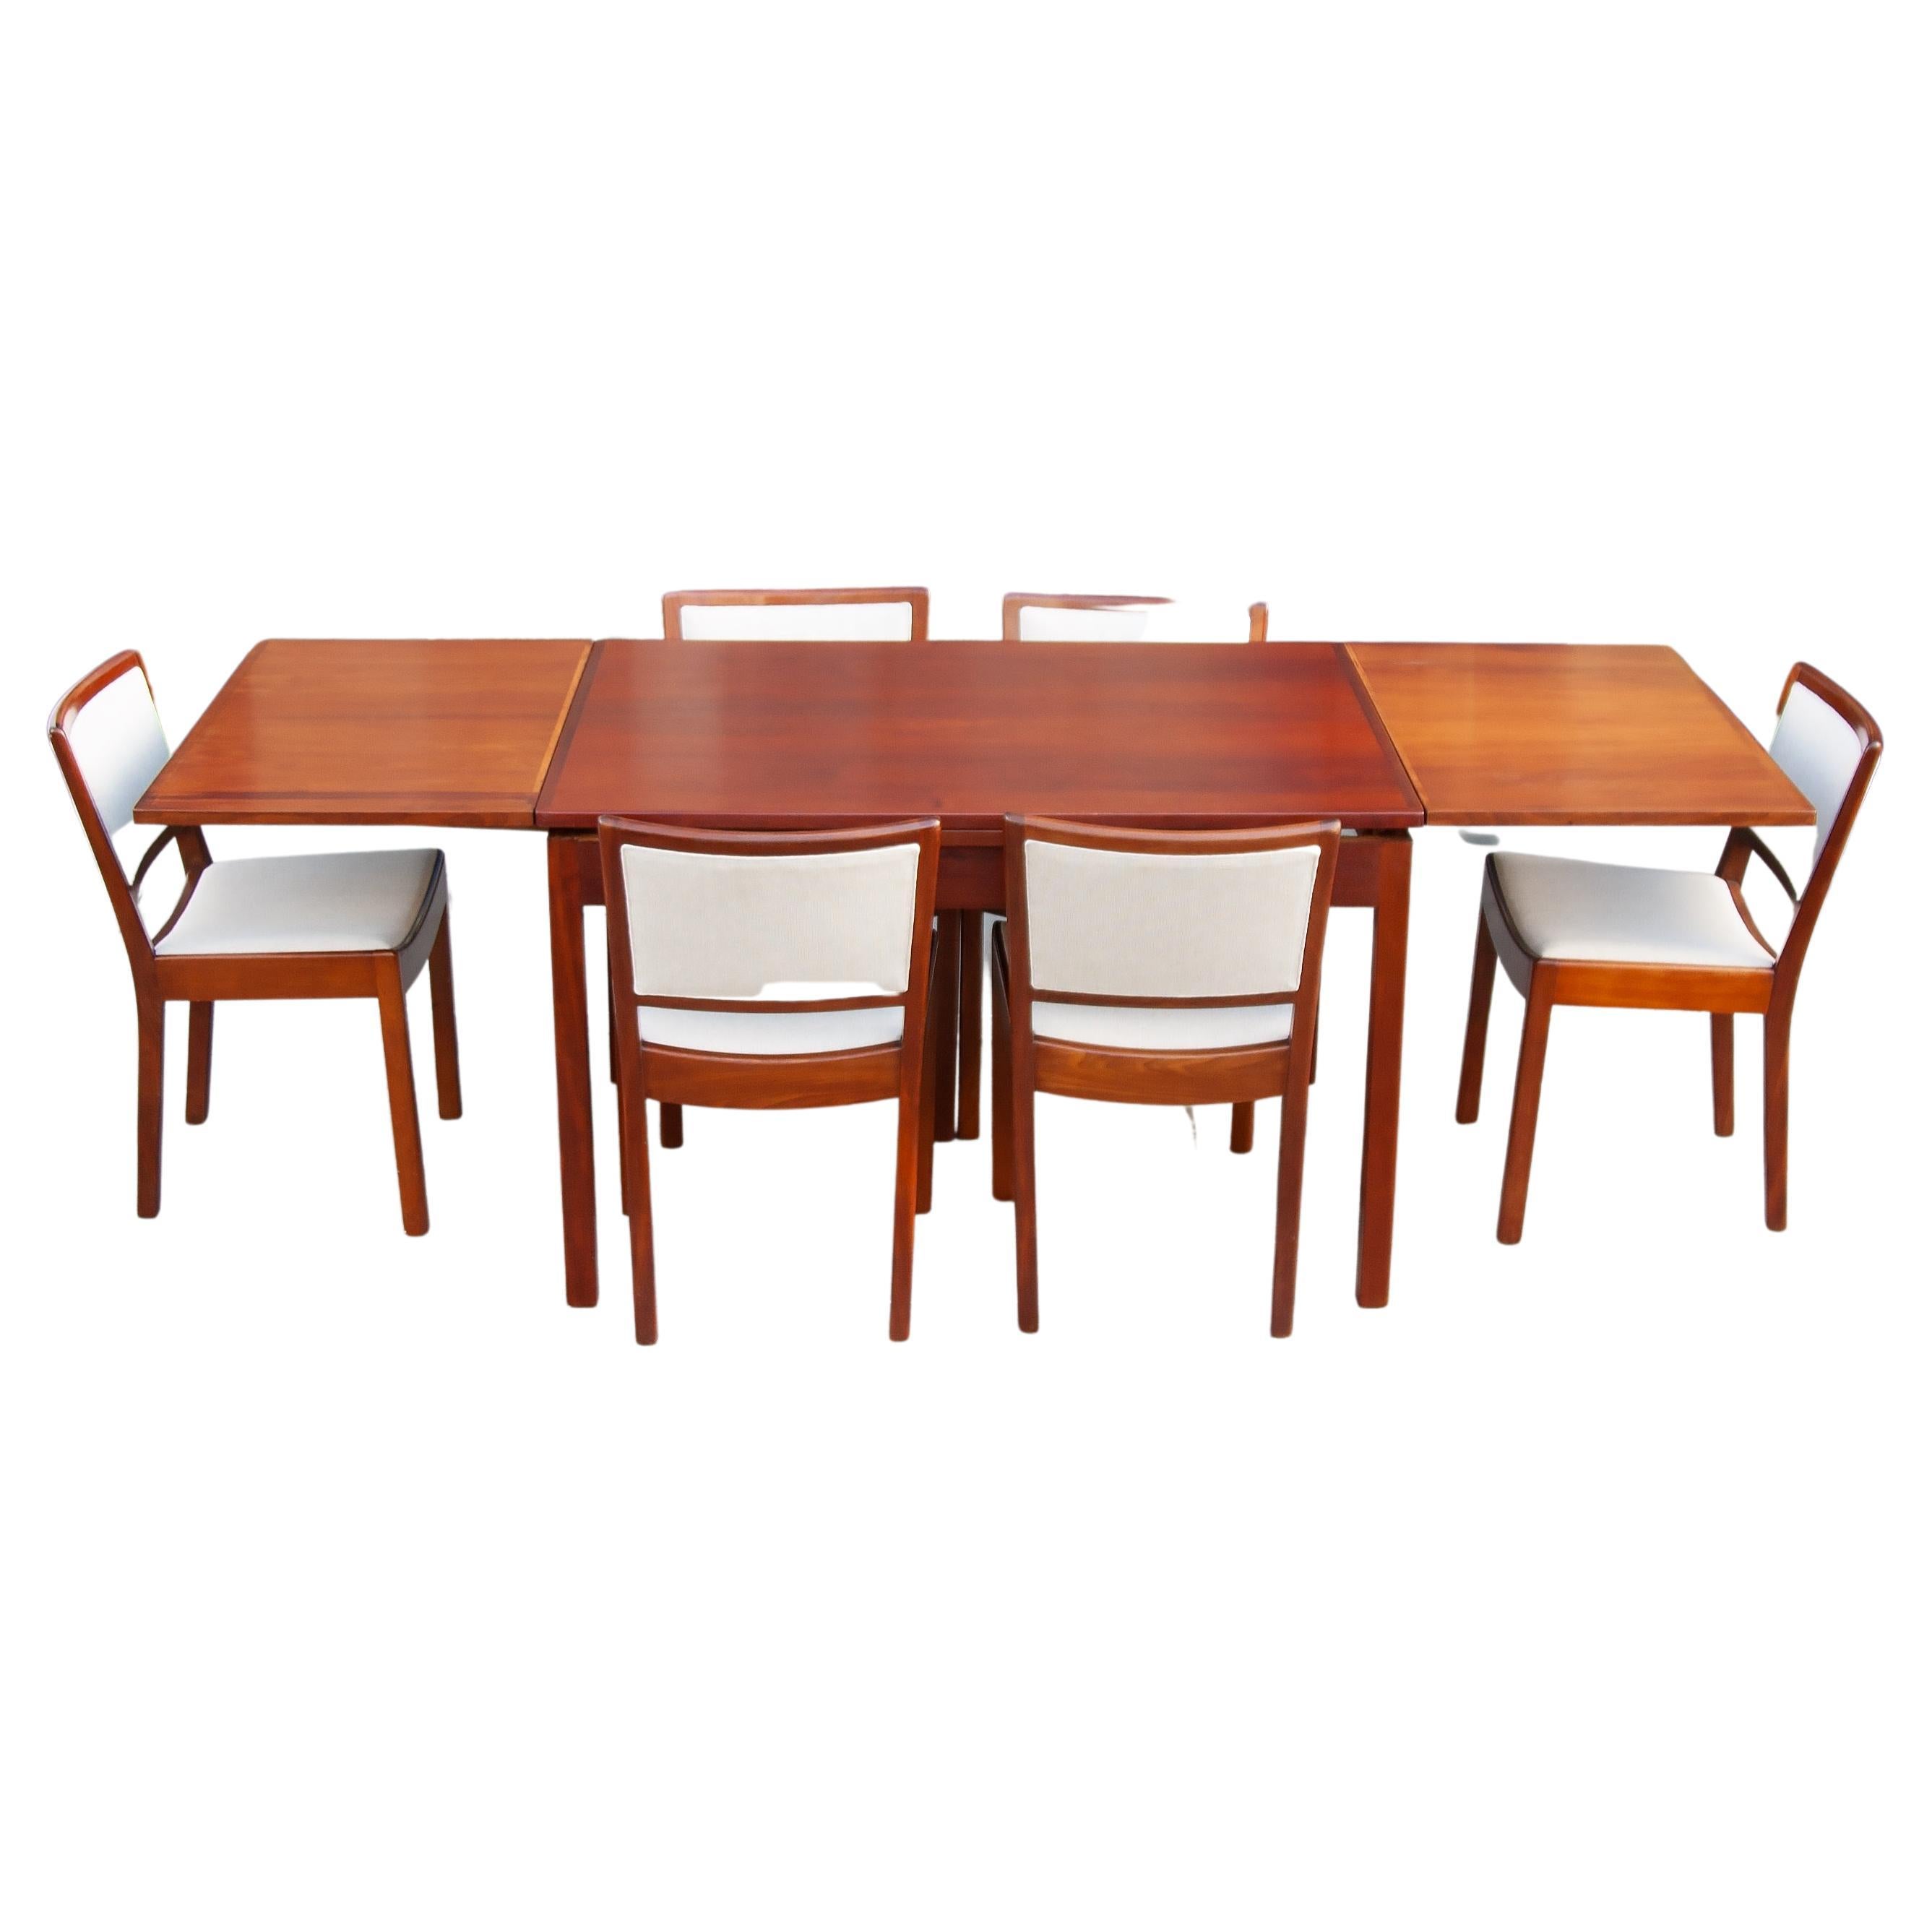 Mahogany Dining Table & Set of Six Chairs, Tove and Edvard Kindt-Larsen, 1930s For Sale